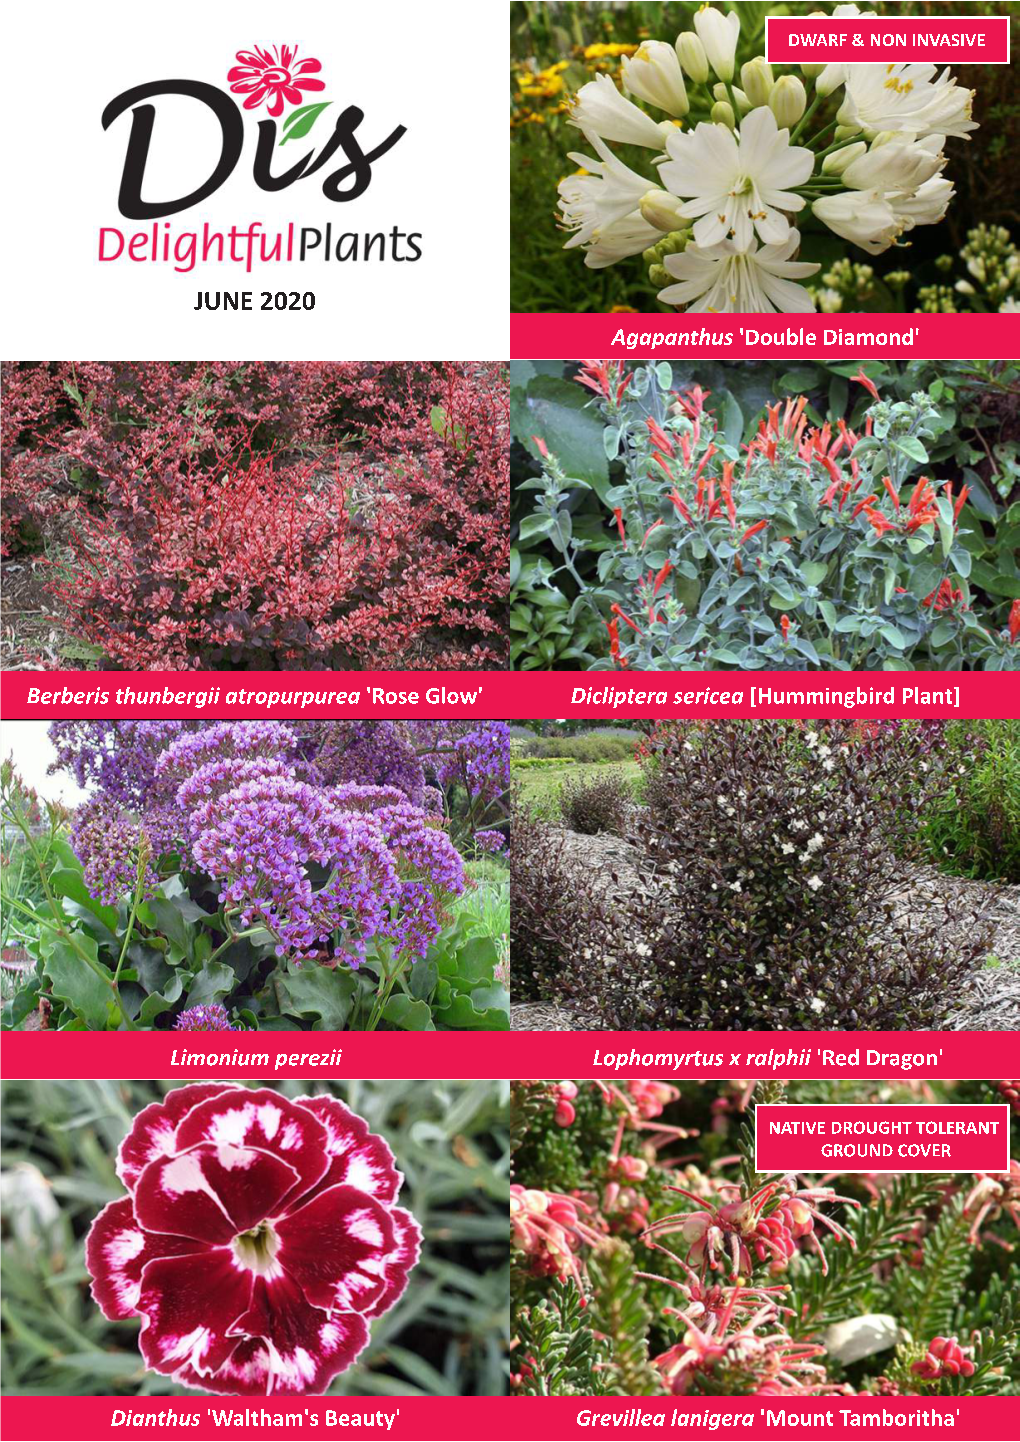 Dis Delightful Plants Ordering Details, Terms & Conditions